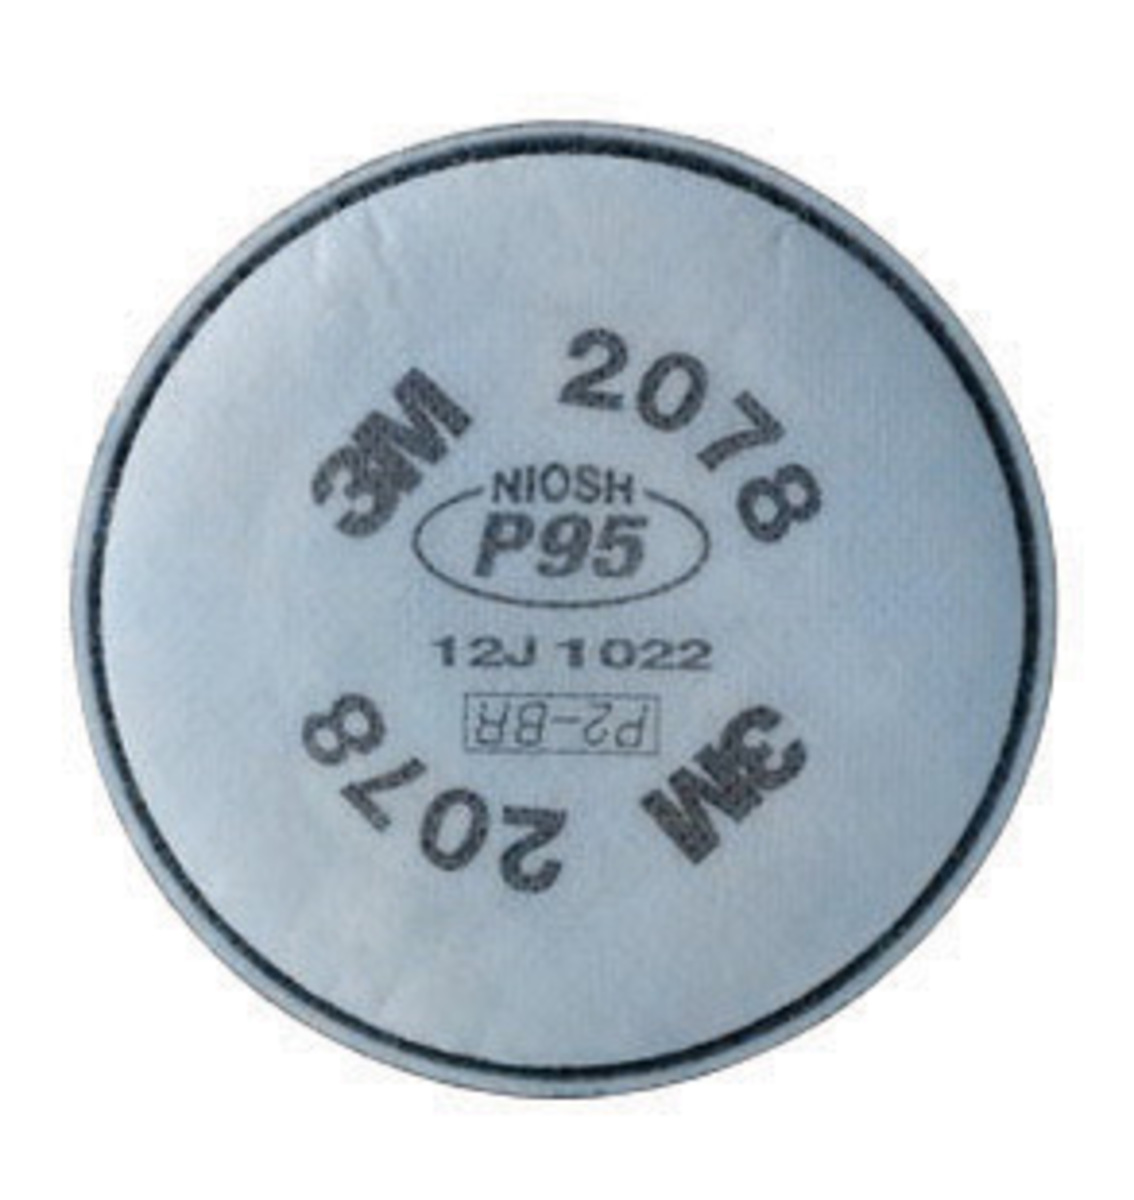 3M™ 2078 P95 Particulate Filter With Nuisance Level Organic Vapor/Acid Gas Relief (Availability restrictions apply.)